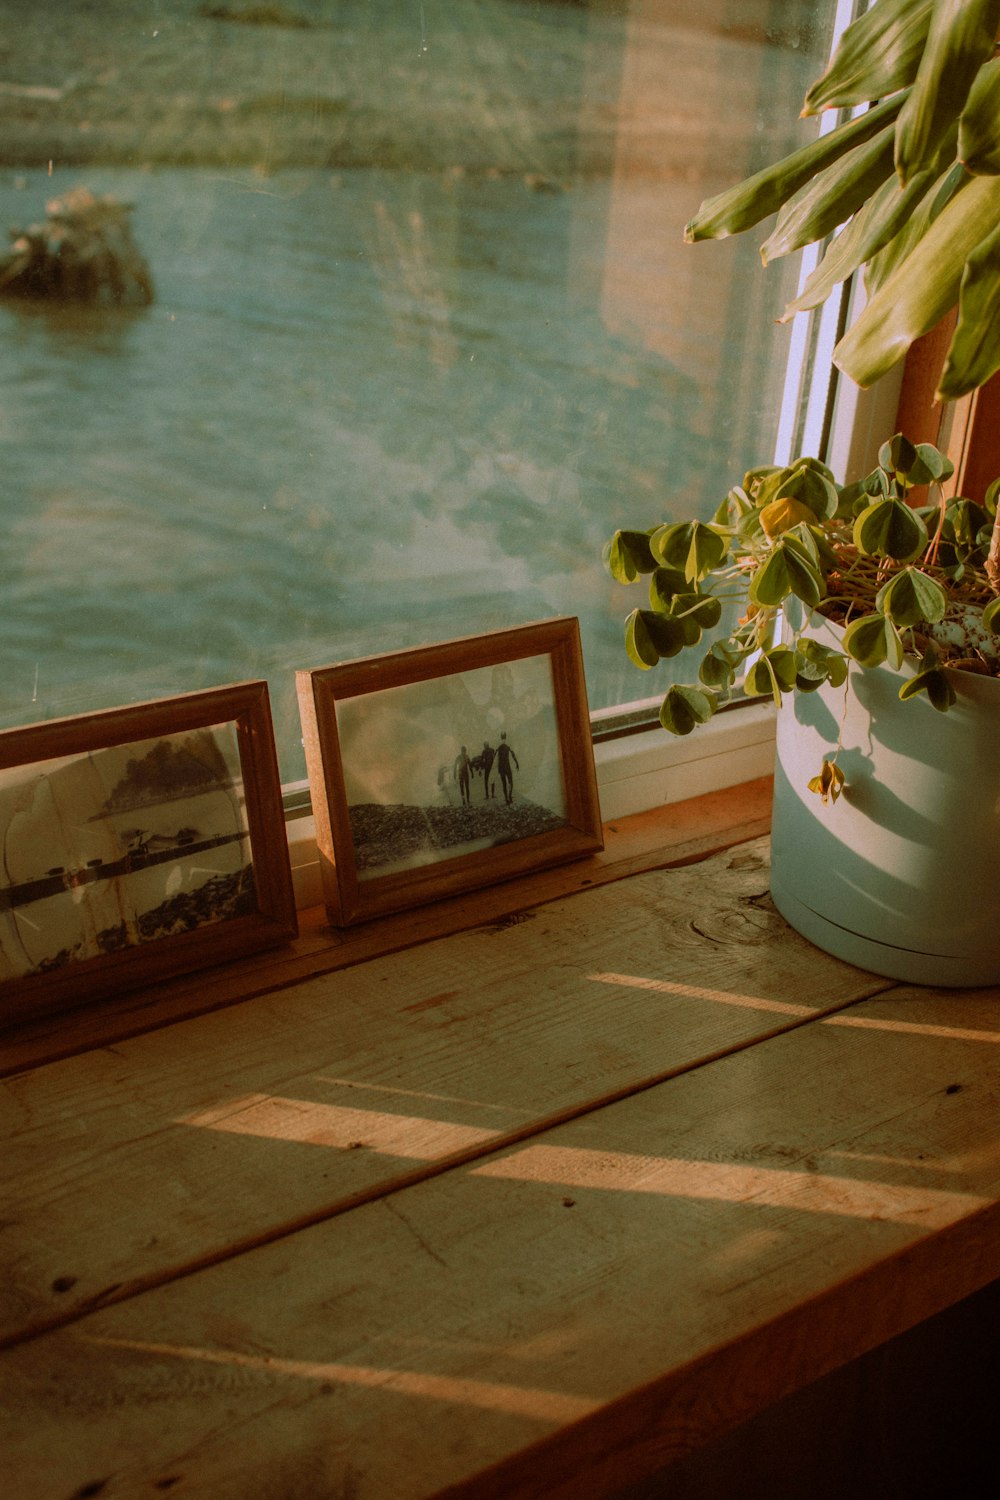 a window sill with a potted plant and two pictures on it